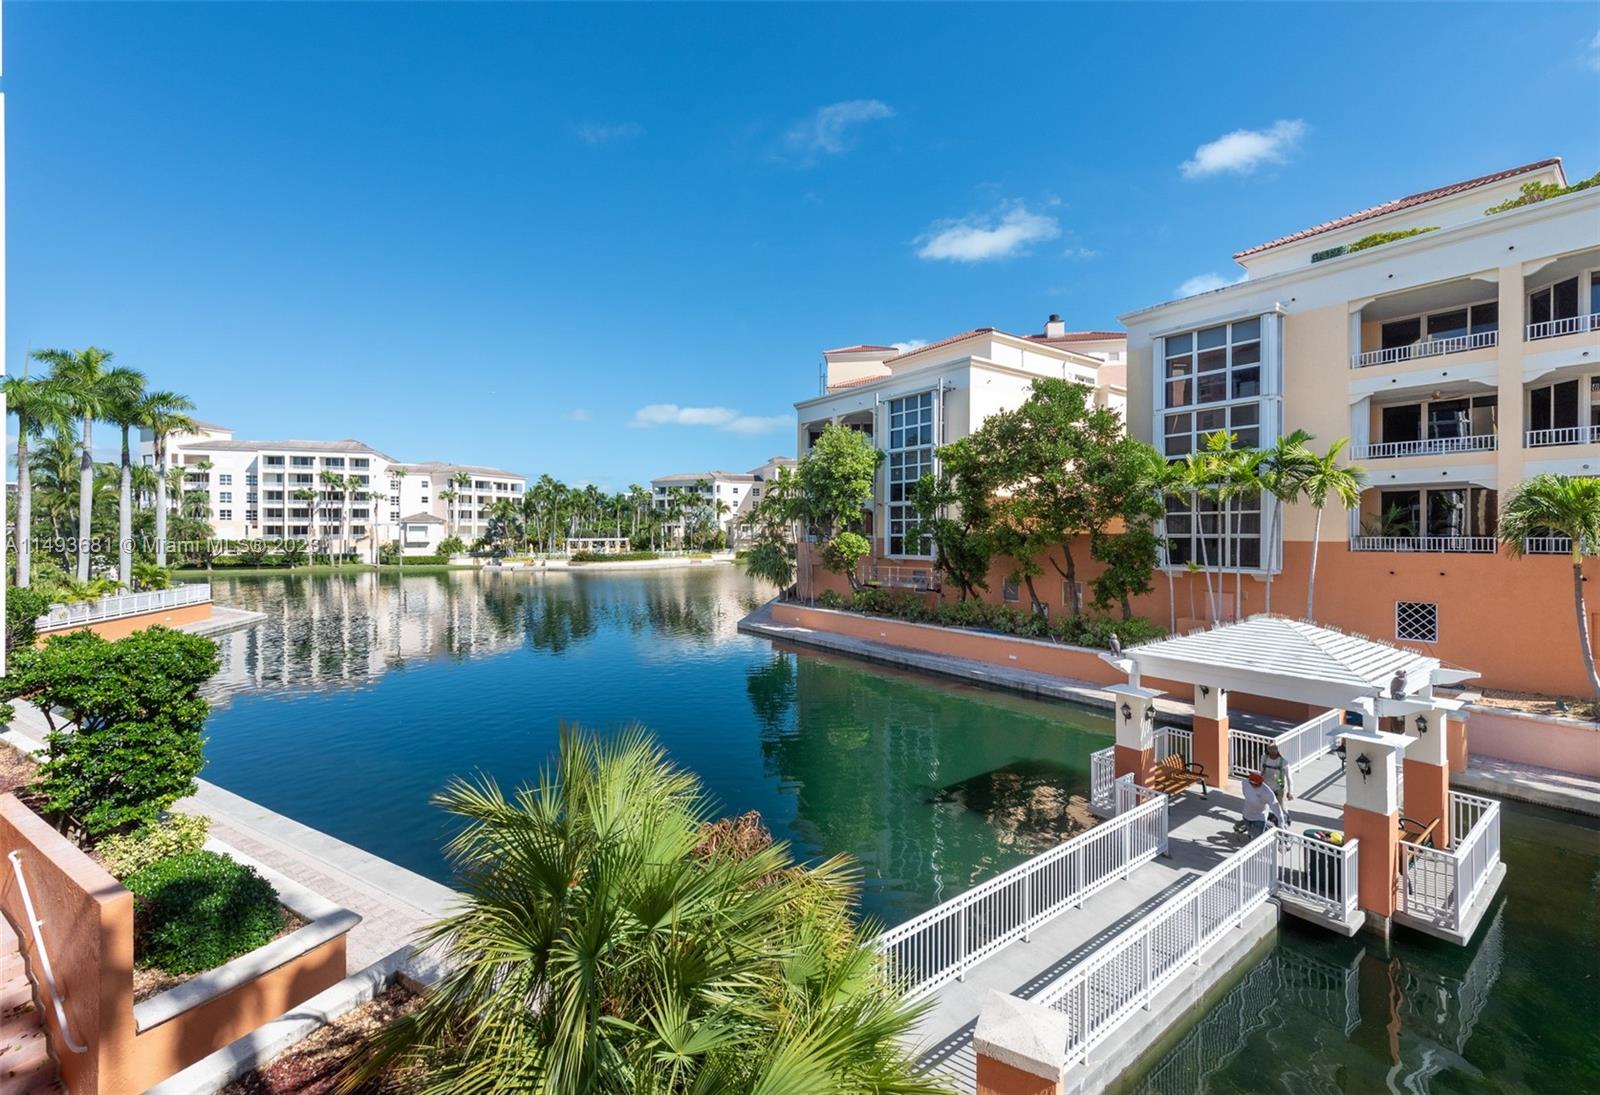 Condo for Sale in Key Biscayne, FL